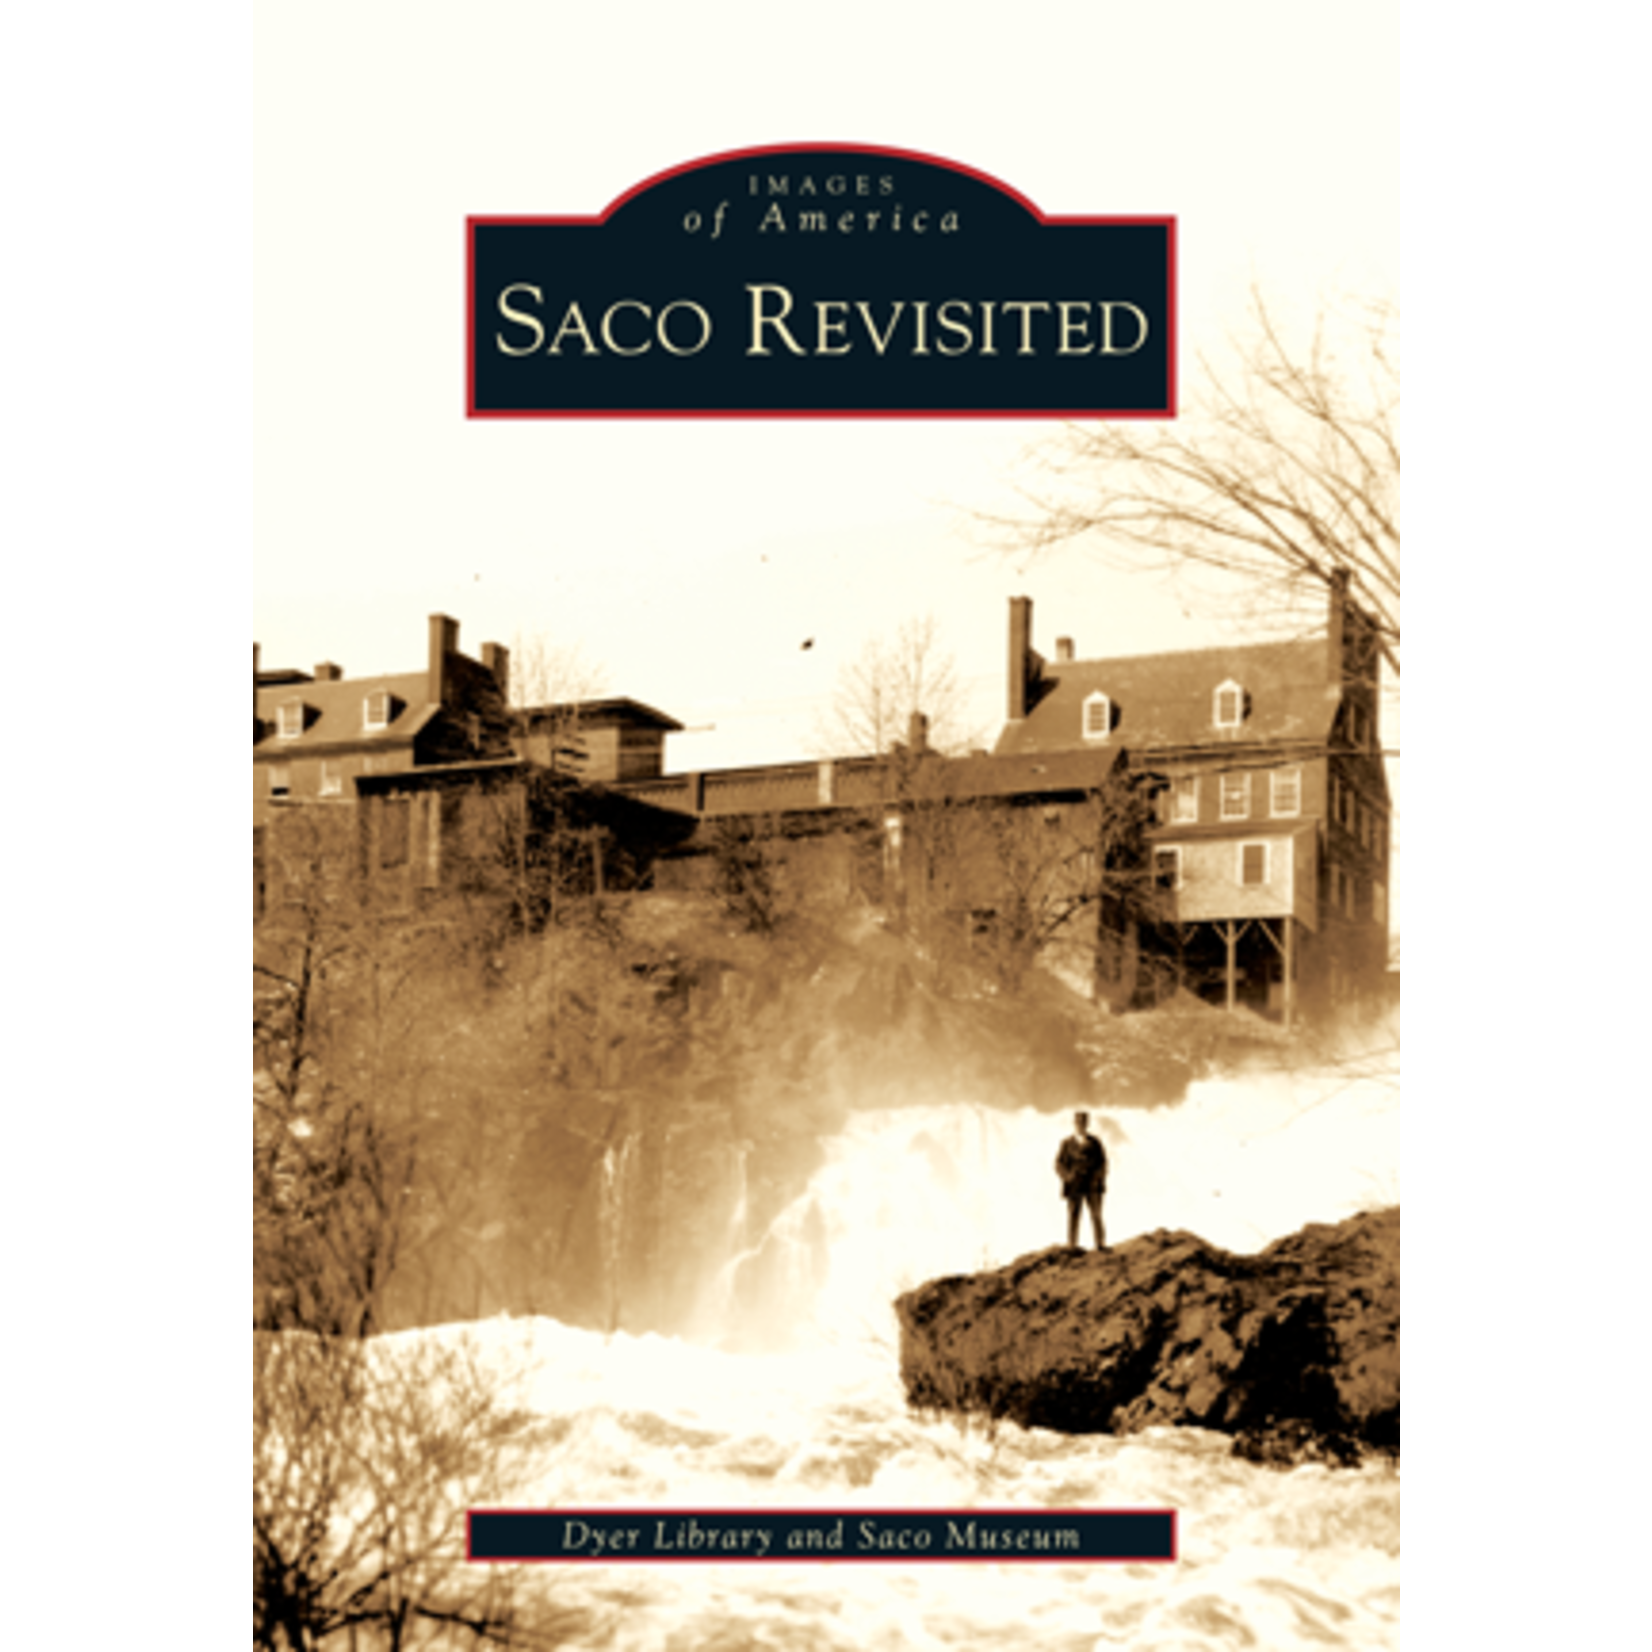 Images of America Saco Revisited